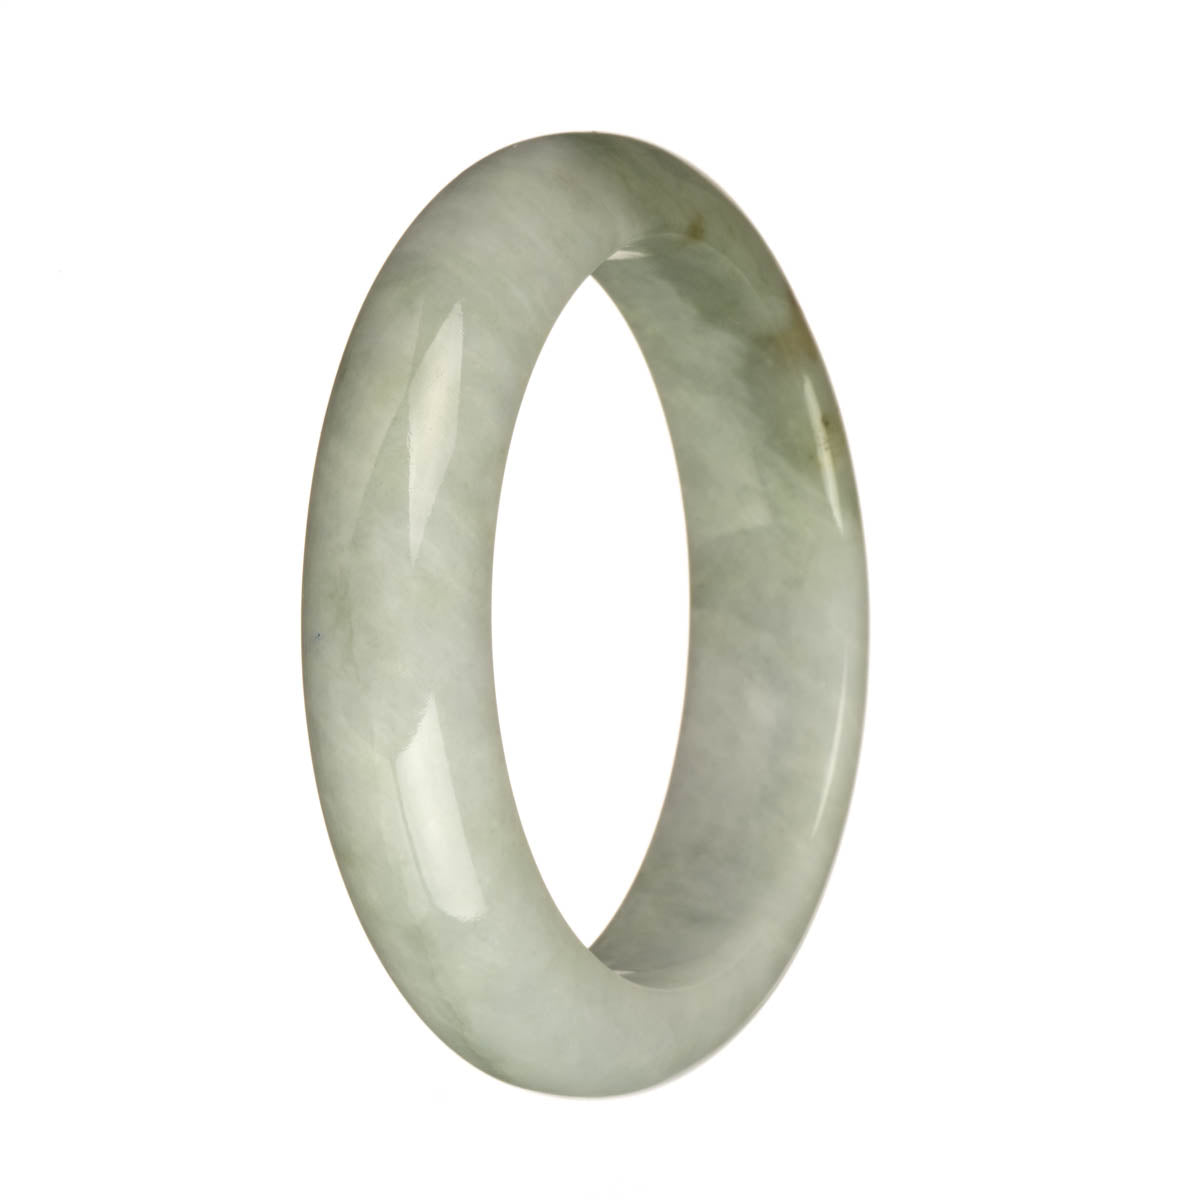 57.4mm Pale Green and Green with Brown Spot Jade Bangle Bracelet